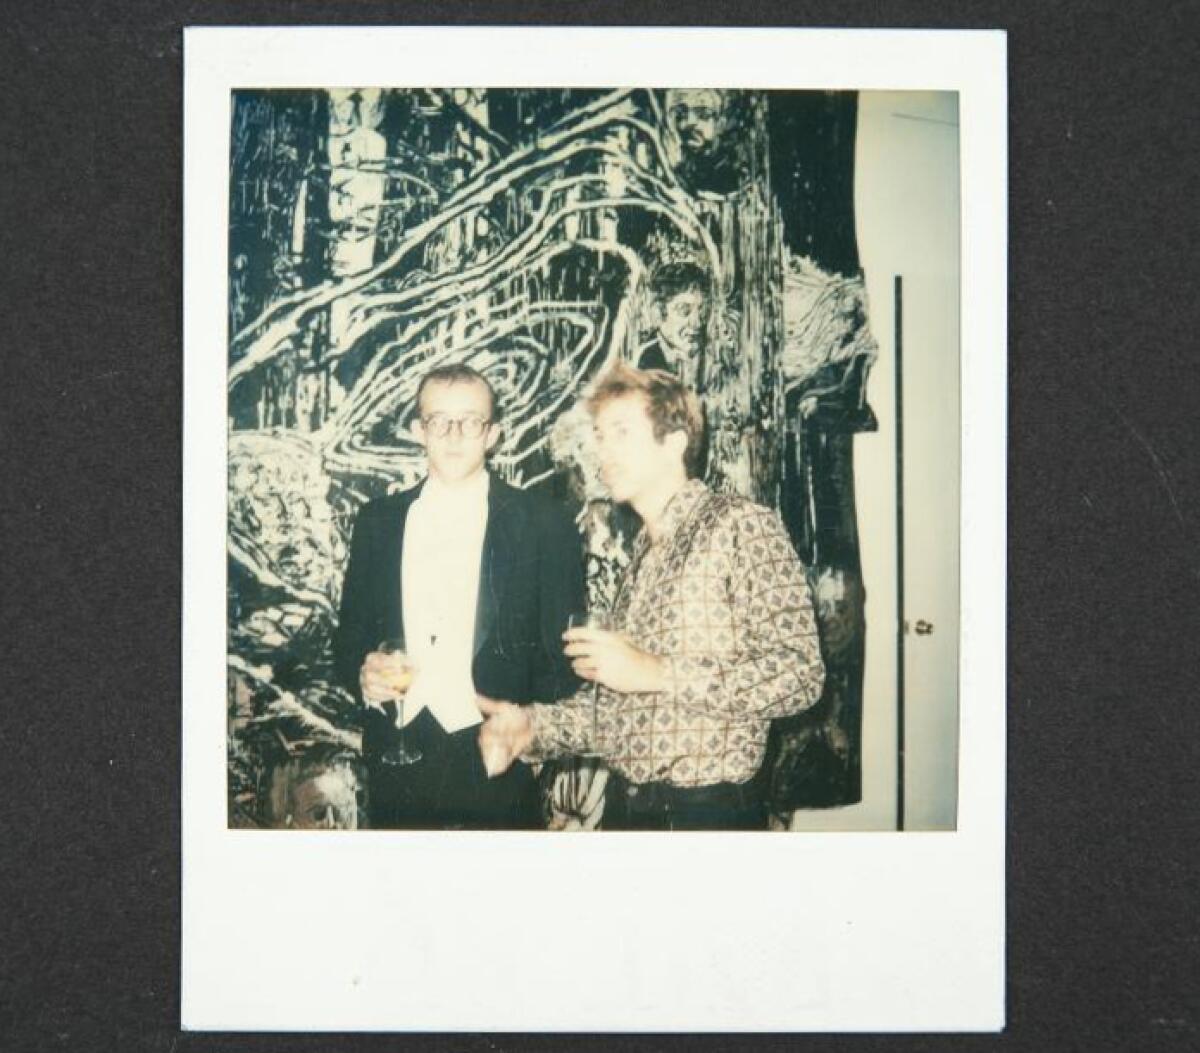 Keith Haring, left, and Kenny Scharf in New York in 1982.